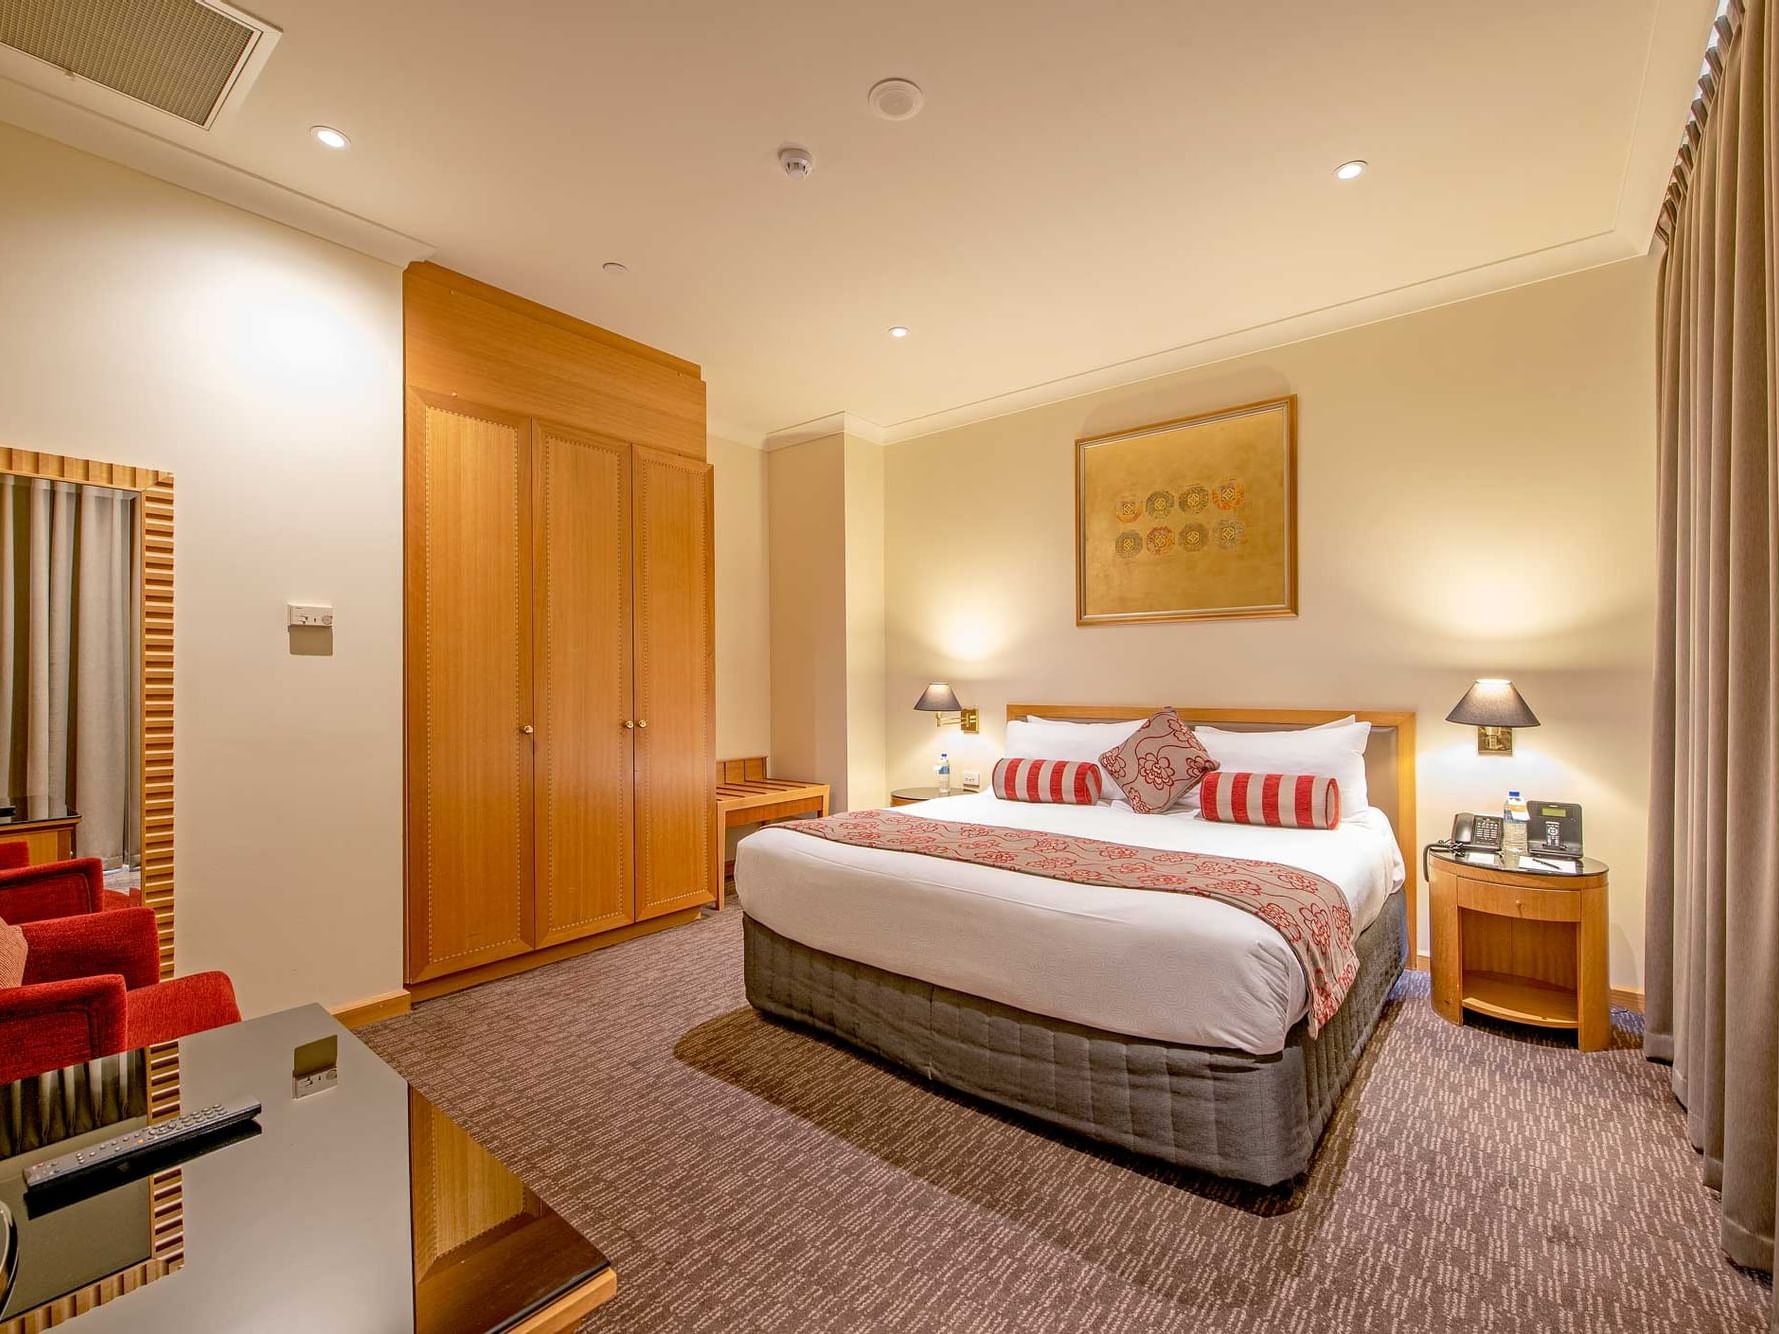 A view of One Bedroom Suite in Duxton Hotel Perth